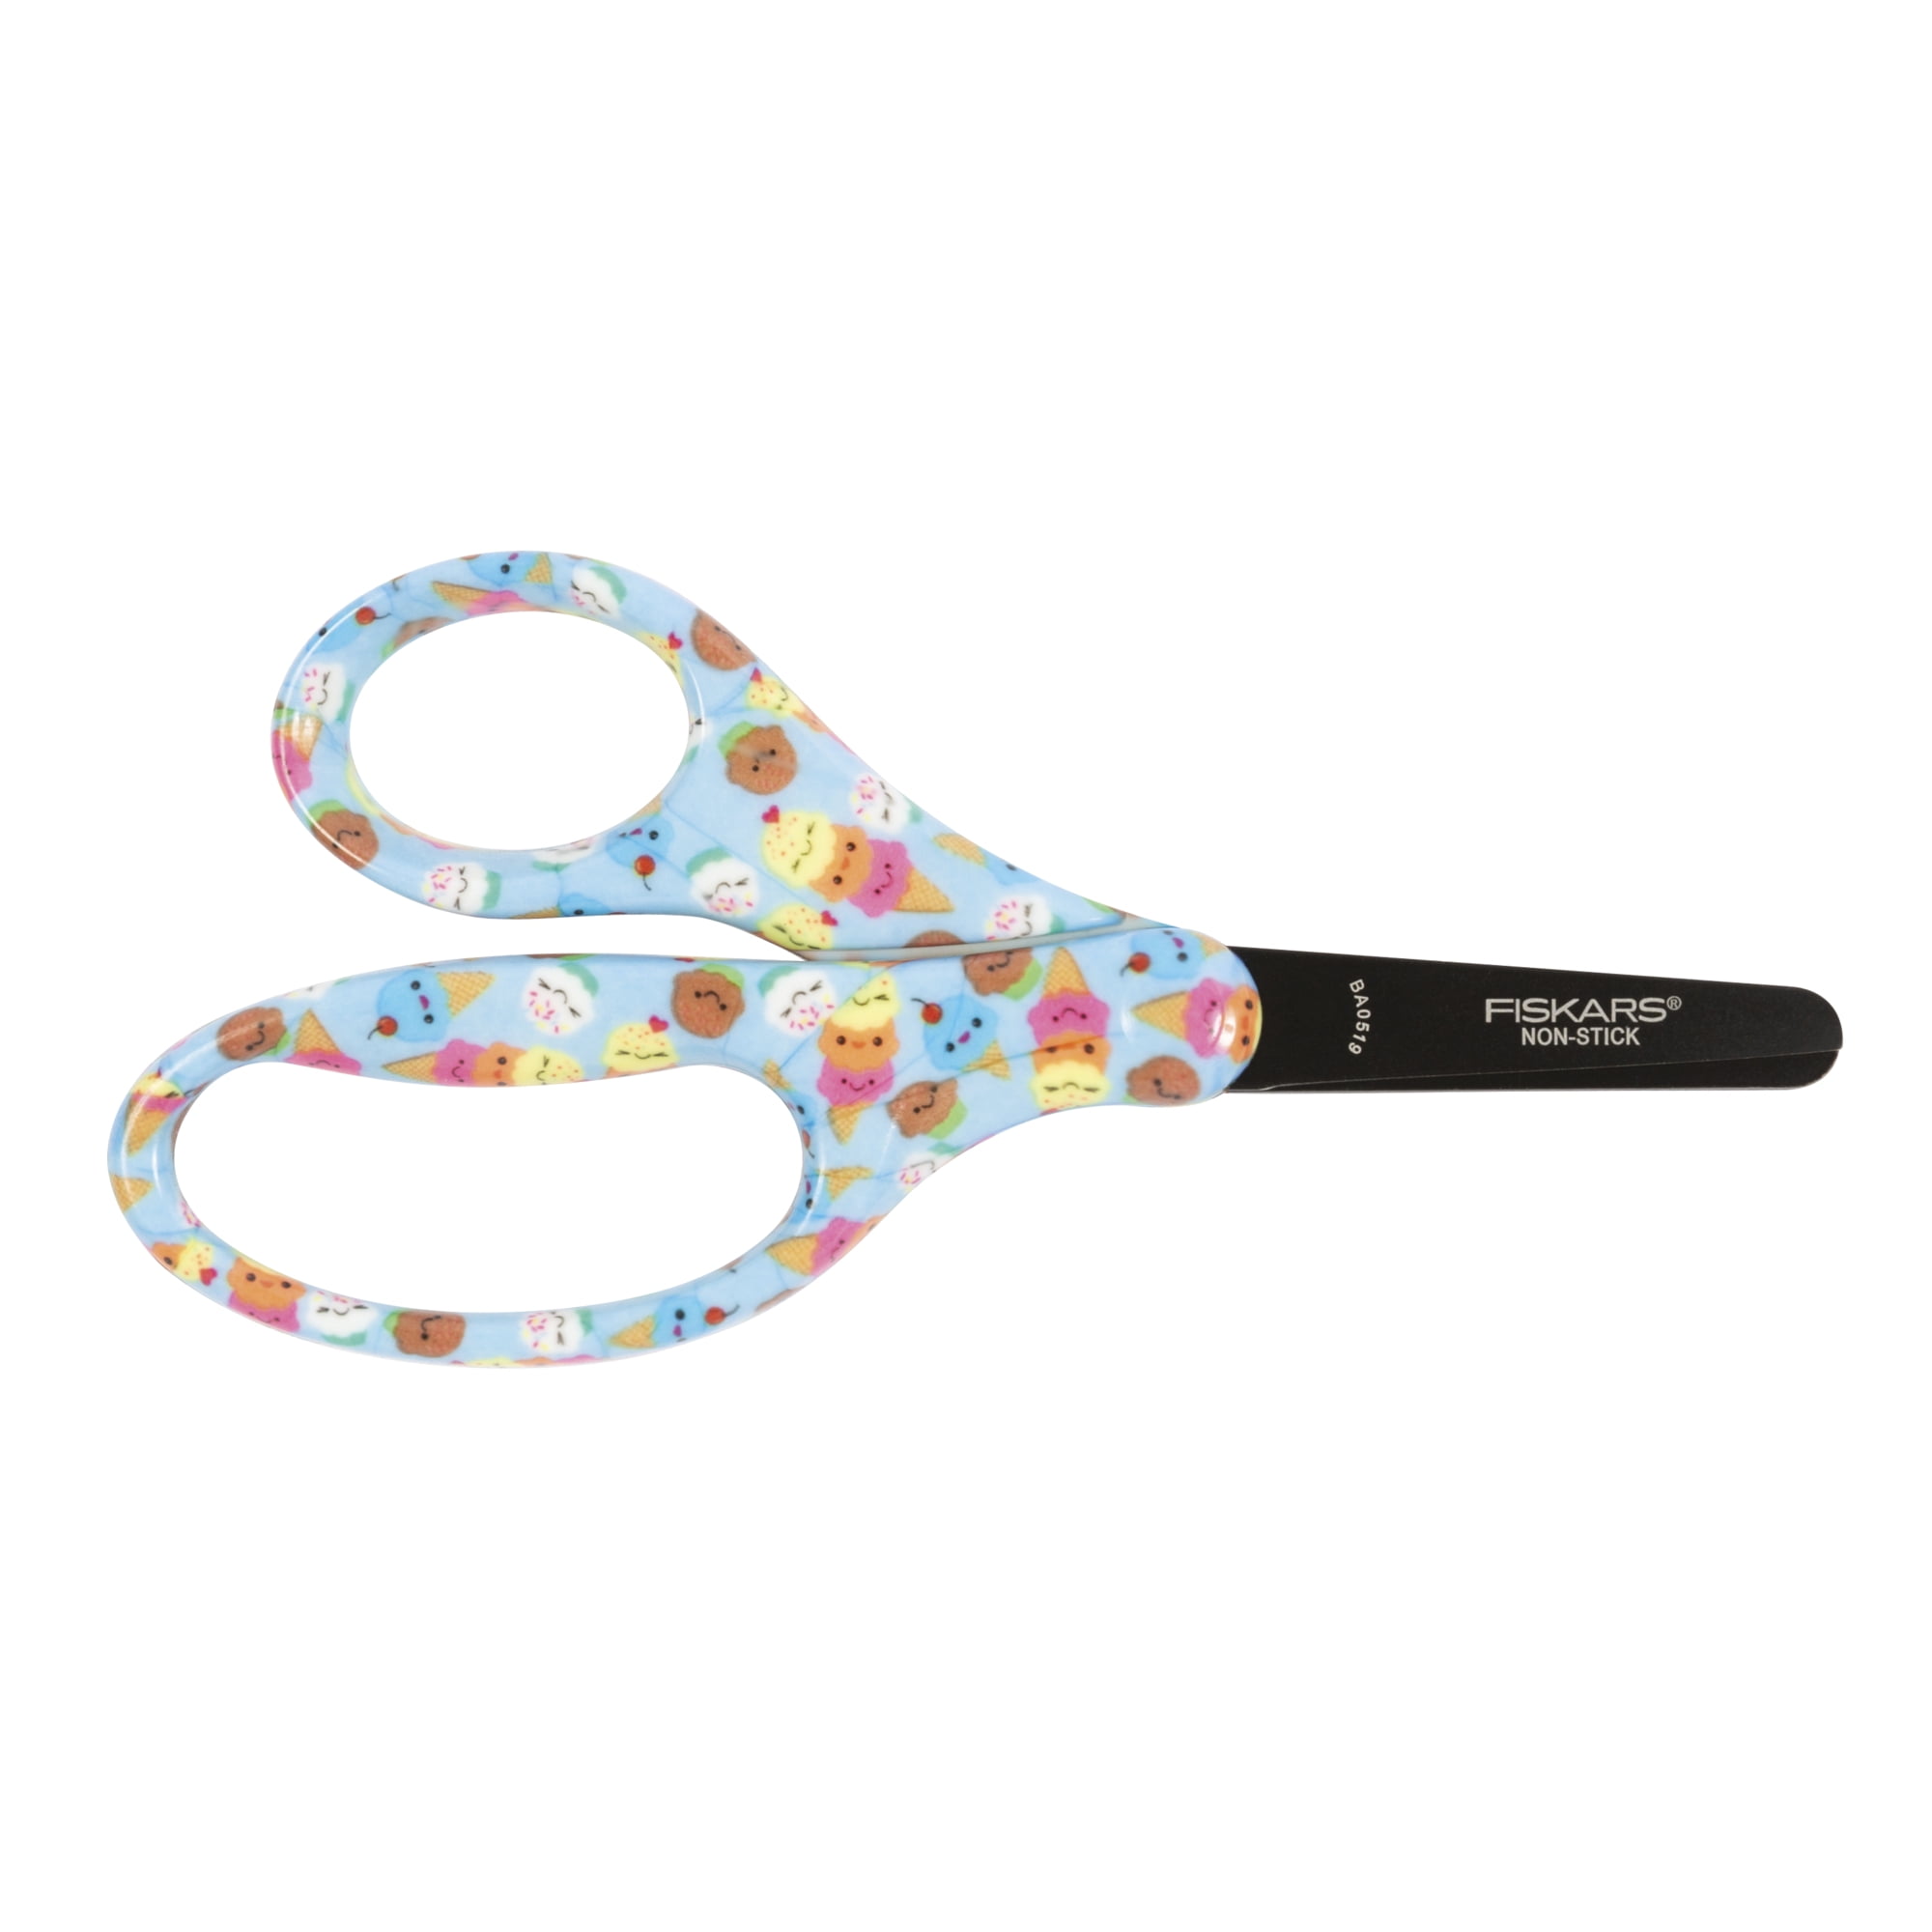 Kids Scissors, 5′ Kid Scissors with Cover, Safety Small scissors